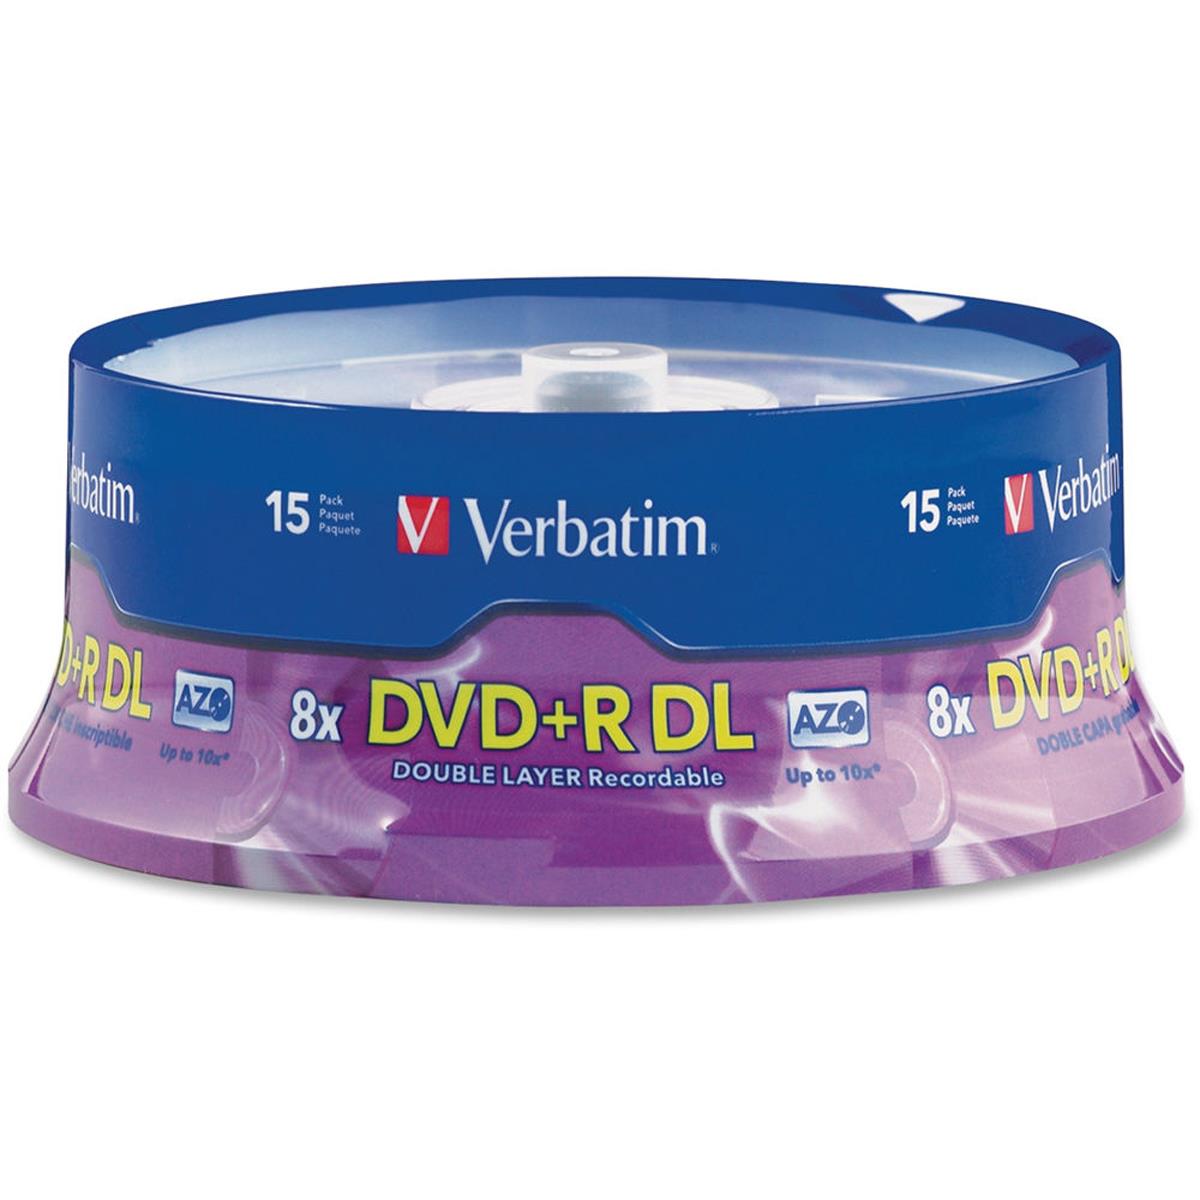 Photos - Other consumables Verbatim 95484 DVD+R Double Layer Media, 8.5GB, 15 Pack 